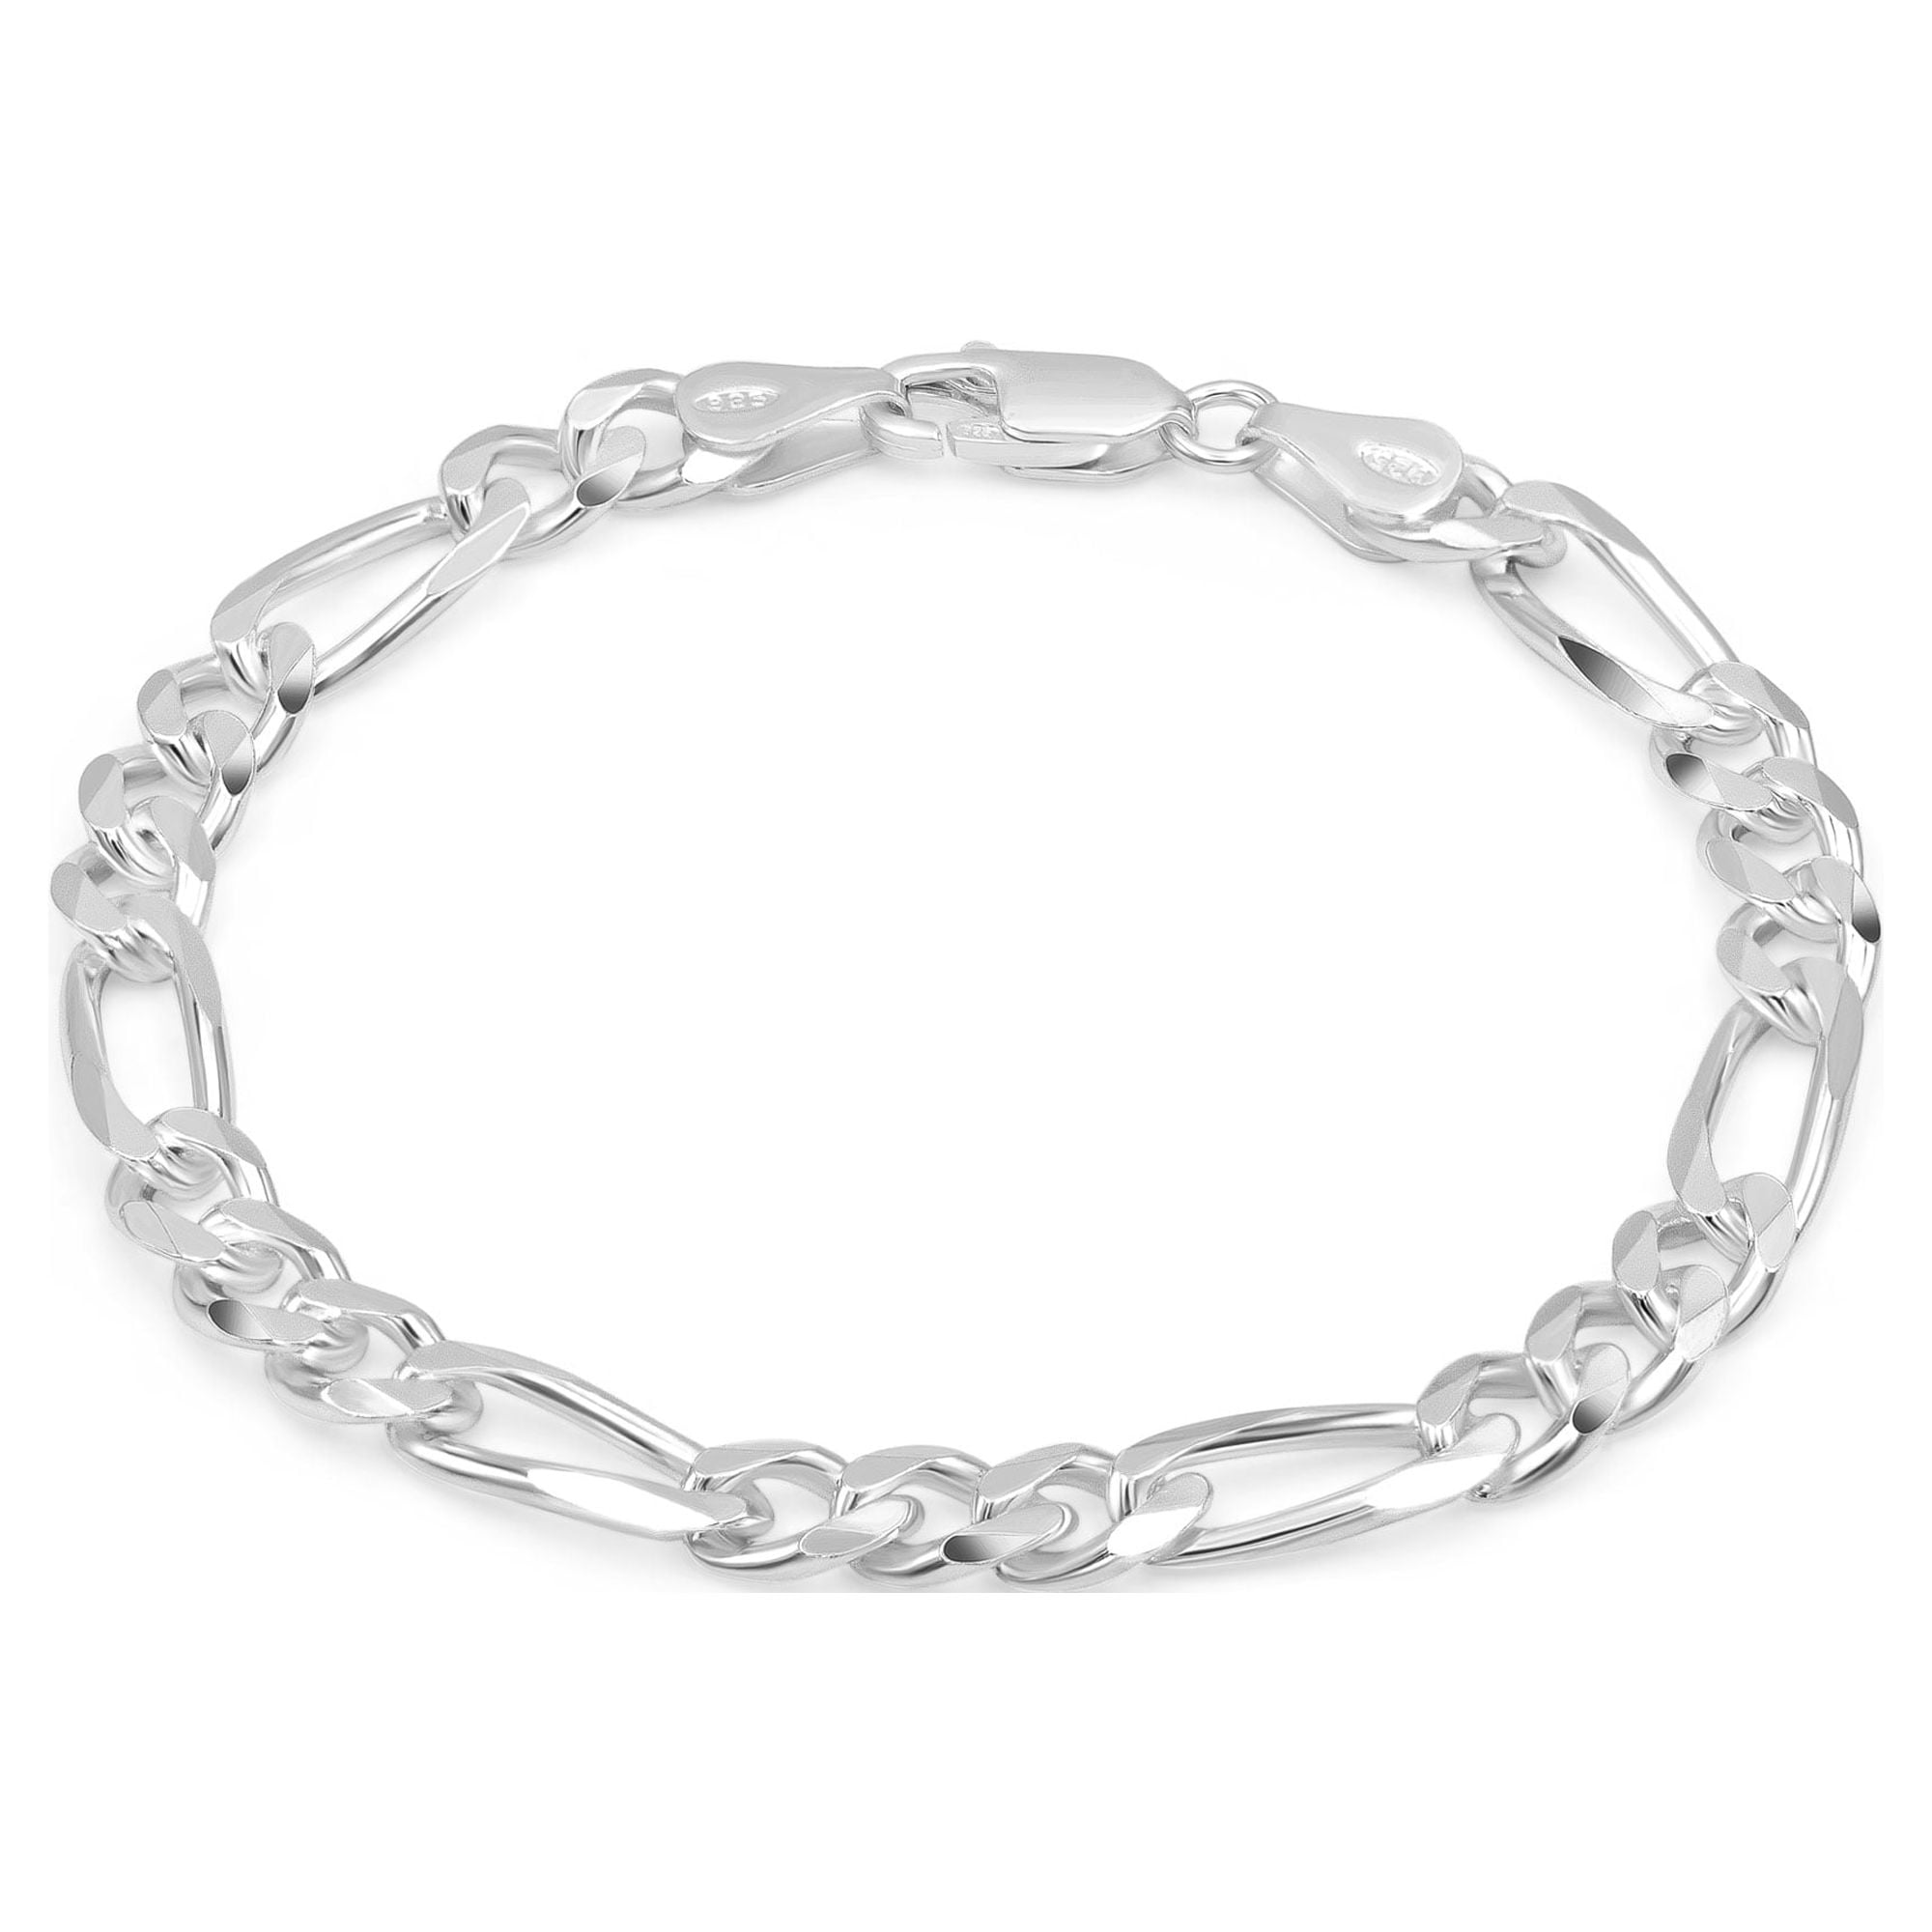 Alfred & Co. London Men's Curb Chain Necklace